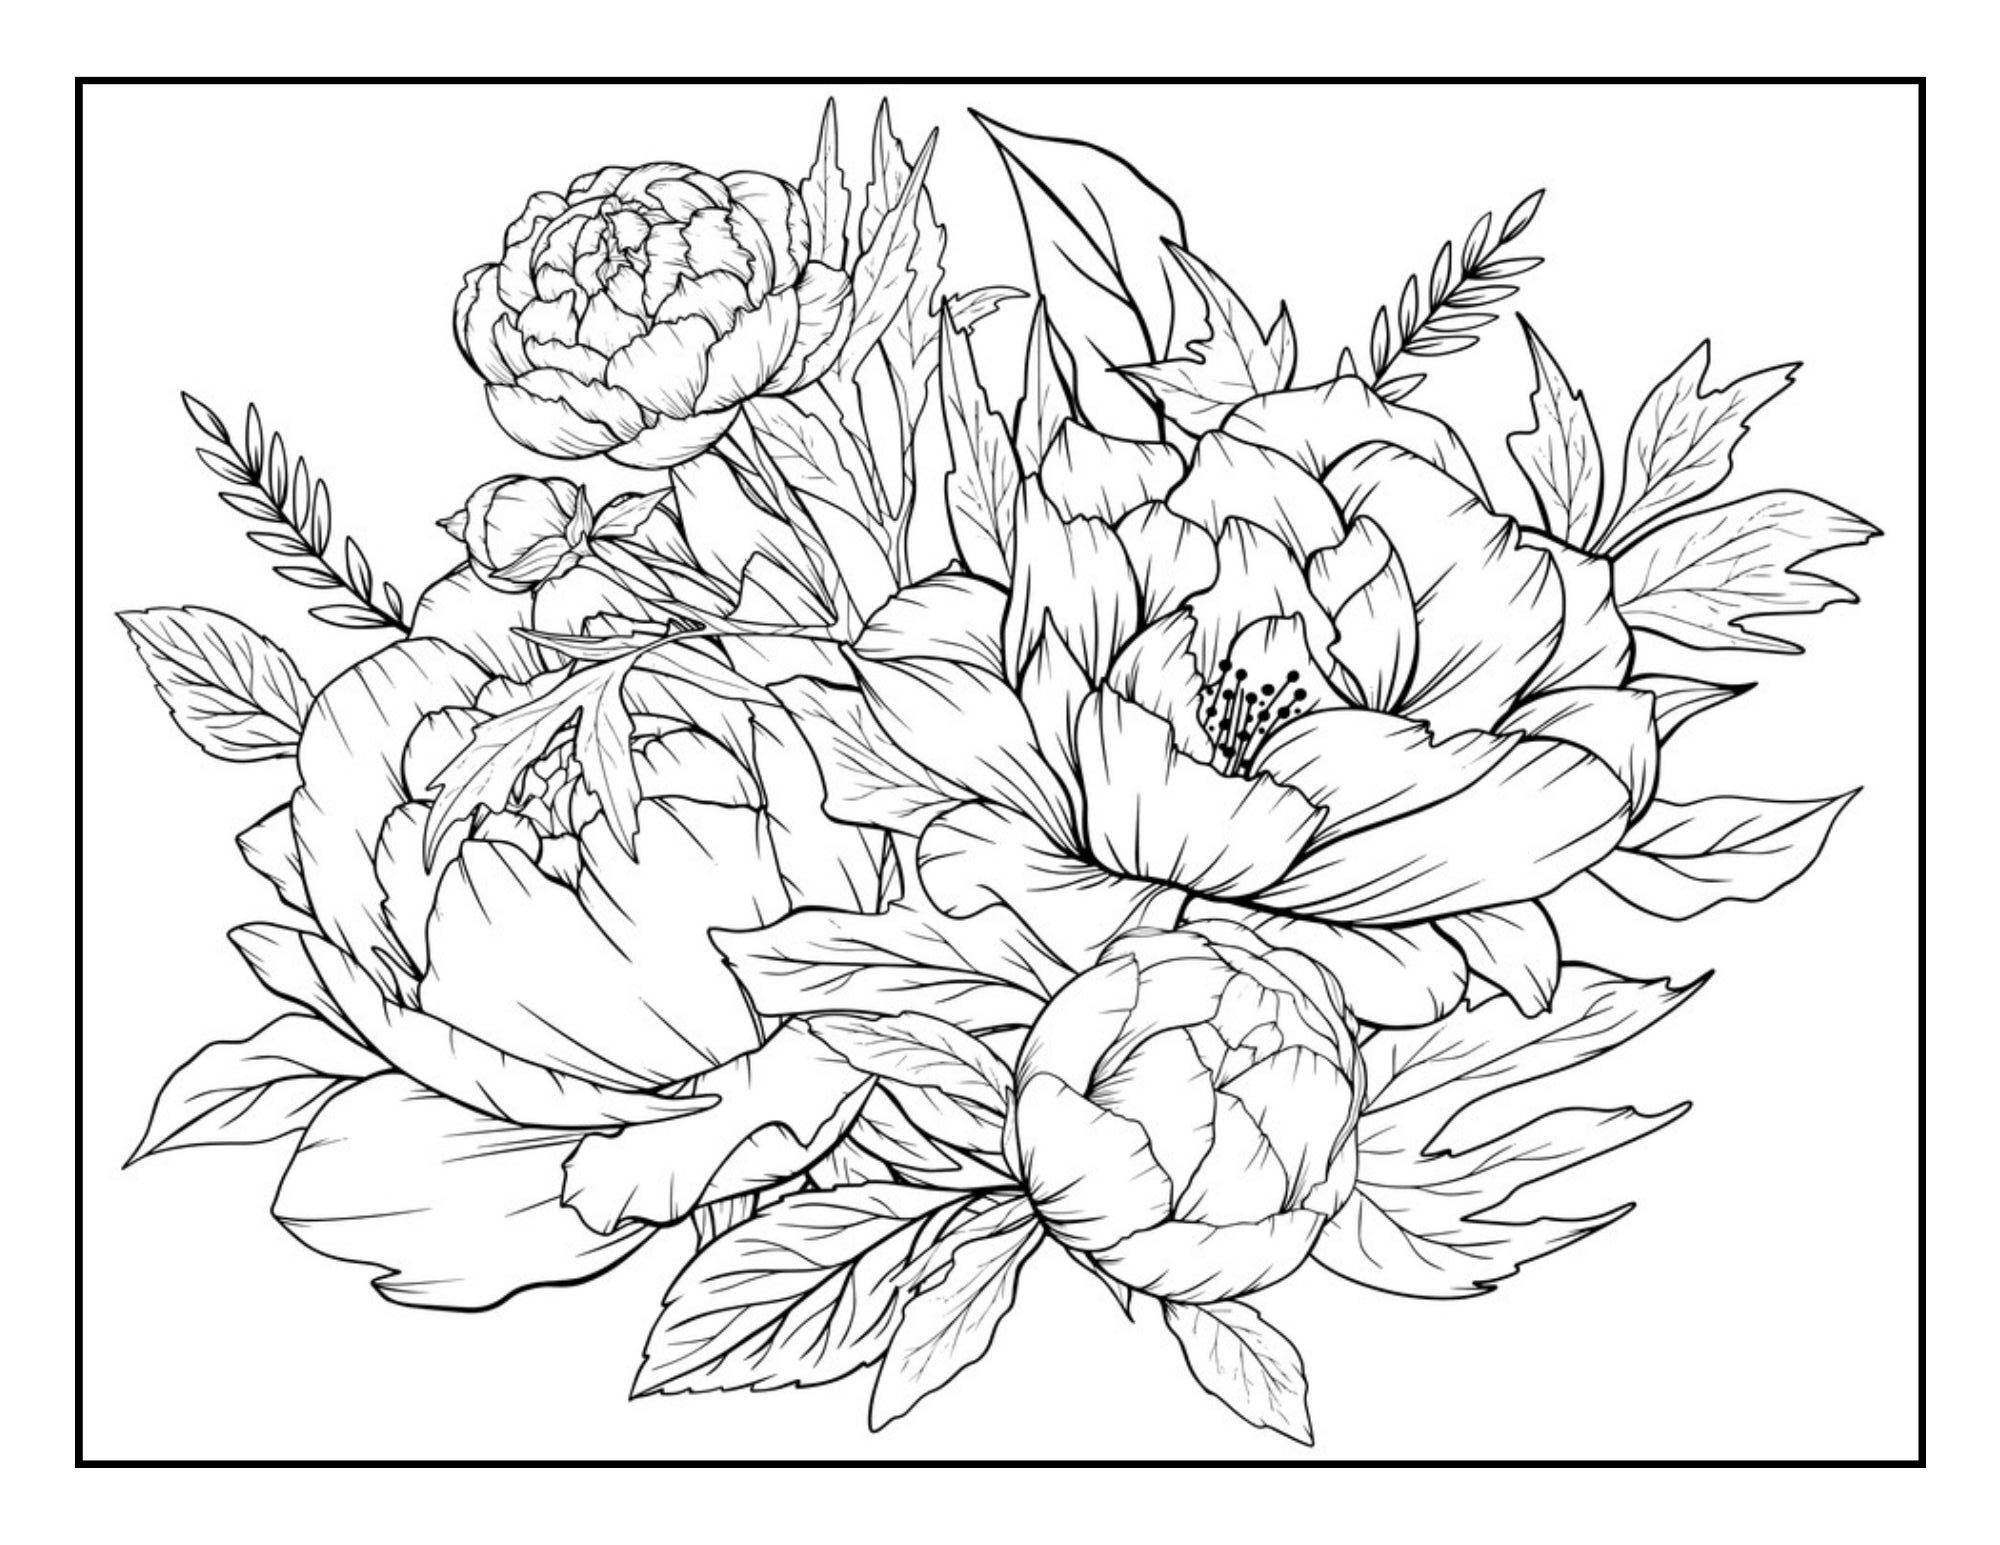 Peonies coloring page.